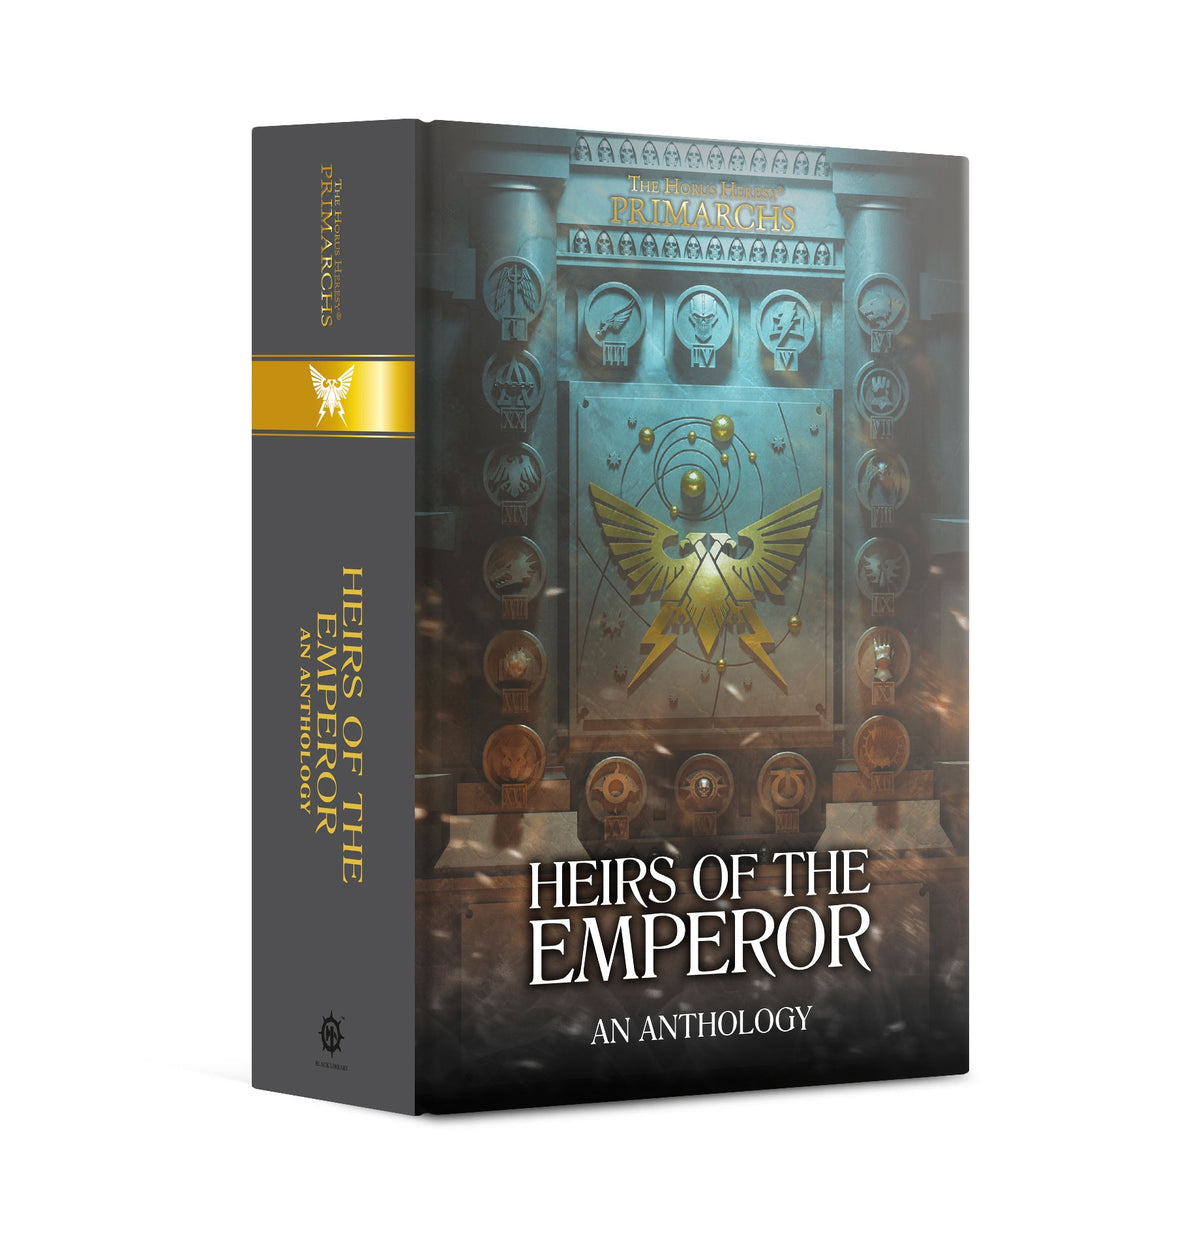 Heirs of the Emperor (Novel HB)